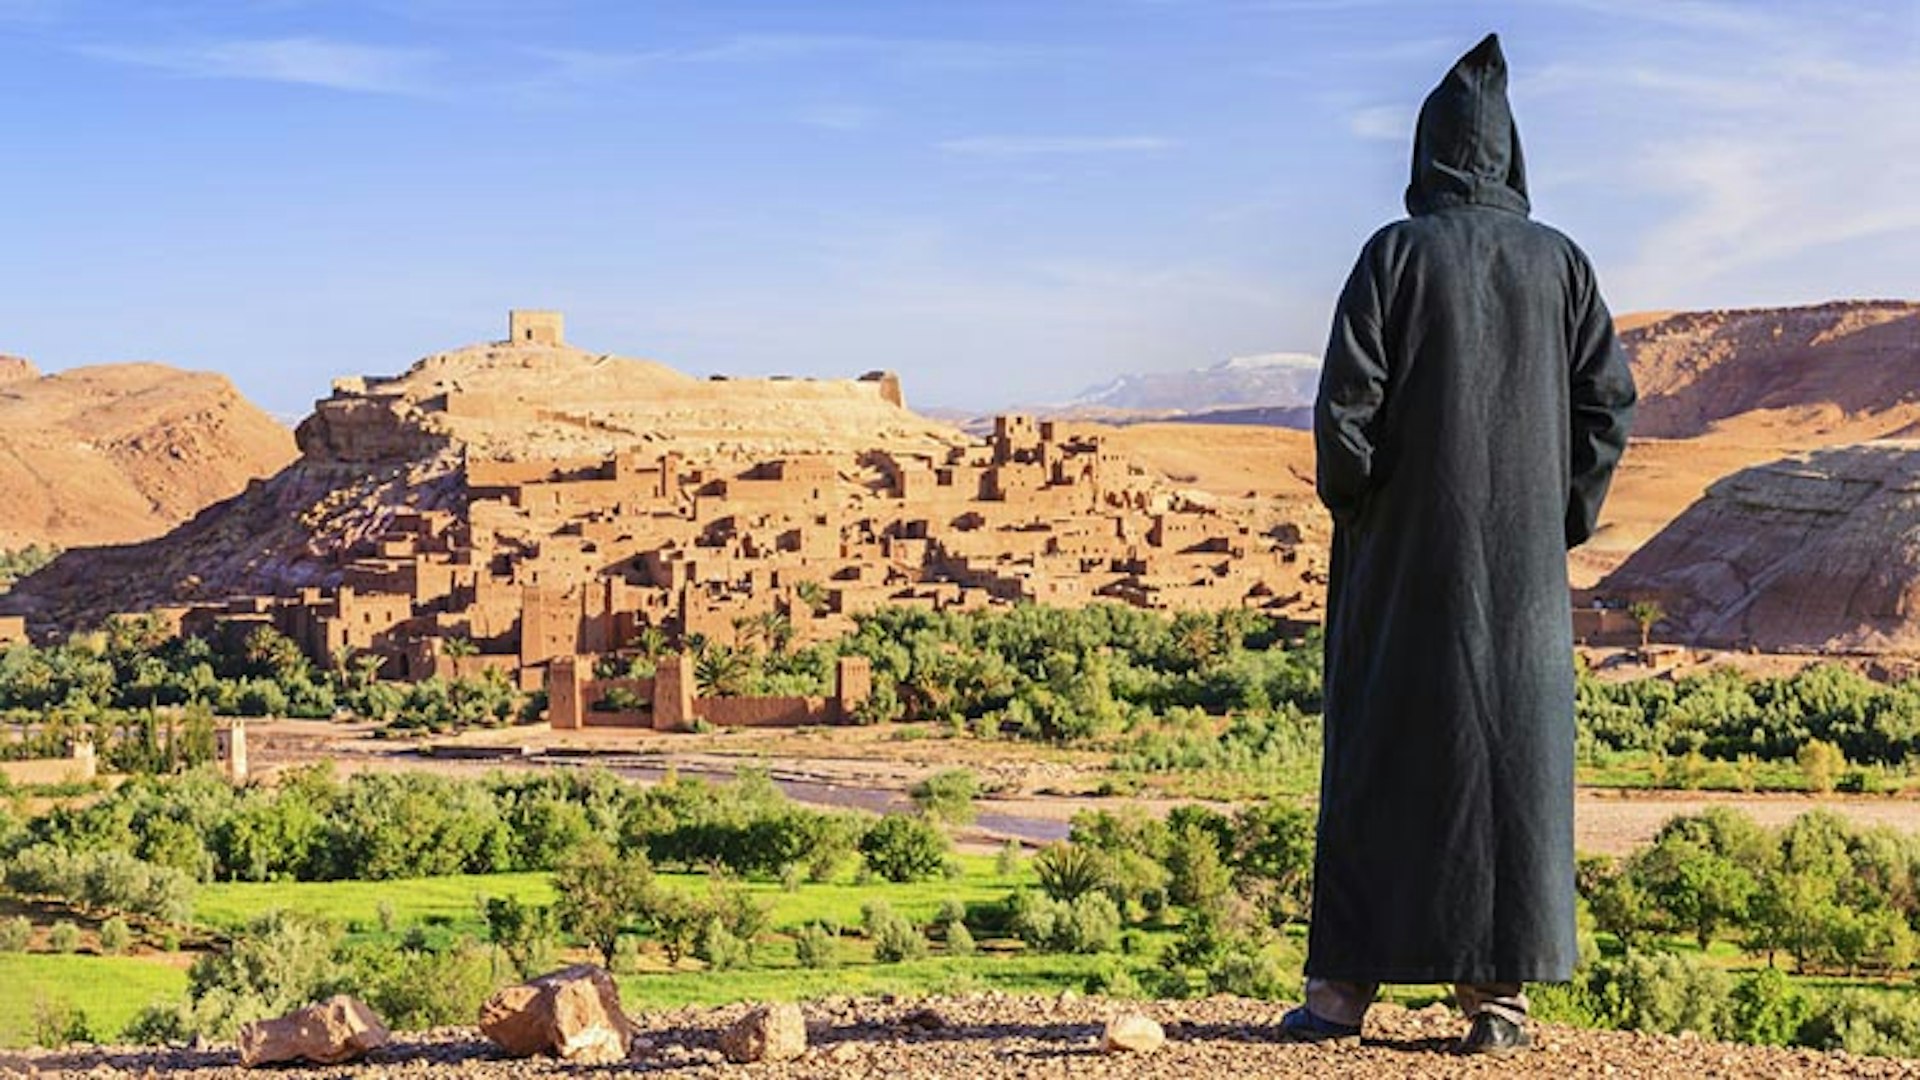 Nope, not a dragon in sight... fortunately the sun-bleached villages and arid mountains of Morocco still evoke key scenes from Game of Thrones. Image by hadynyah / Vetta / Getty Images